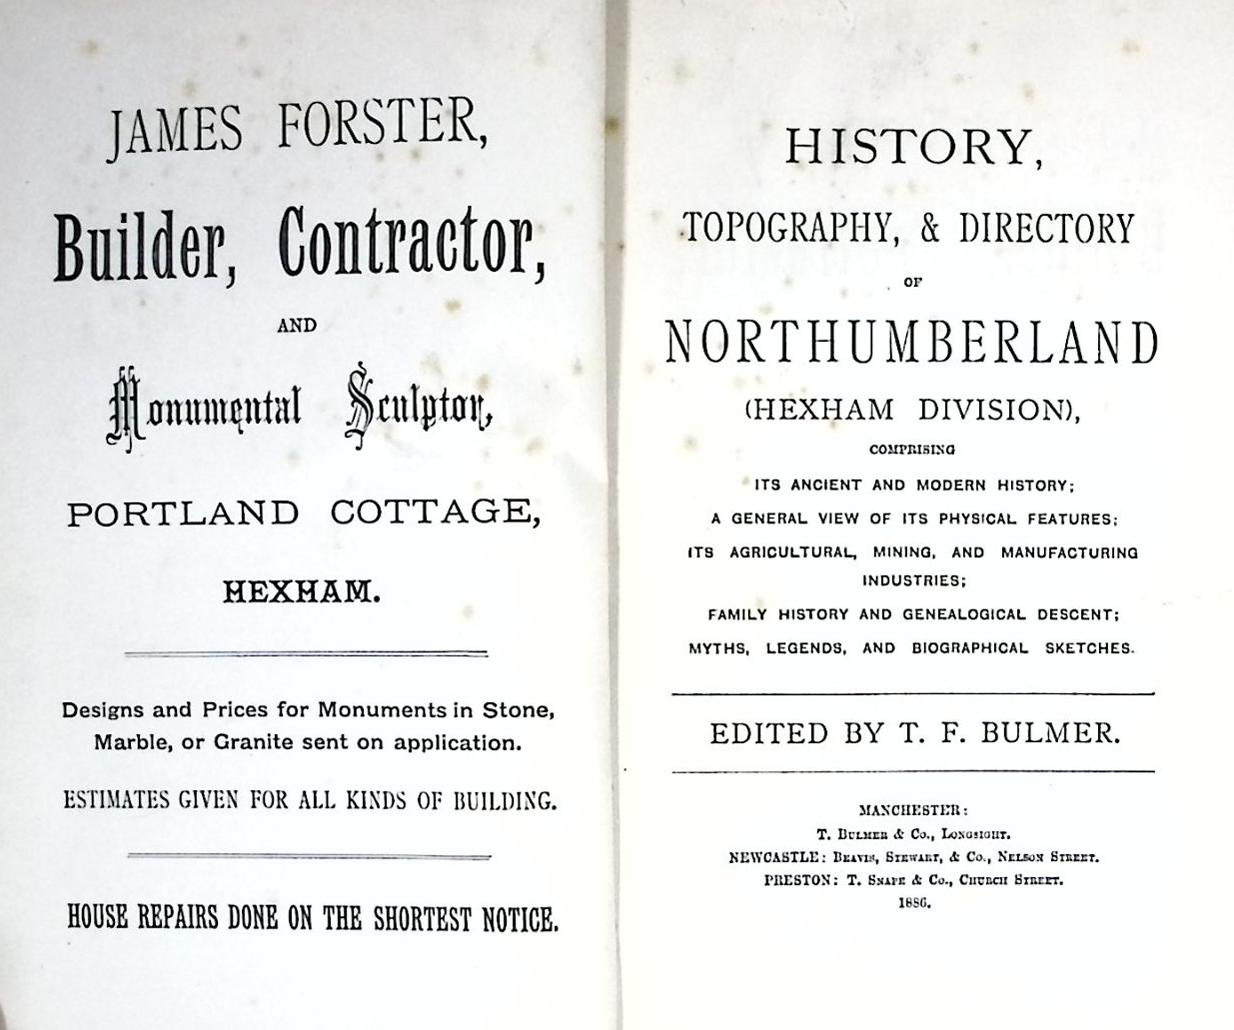 History, Topography and Directory of Northumberland. 1886. [Hexham Division]